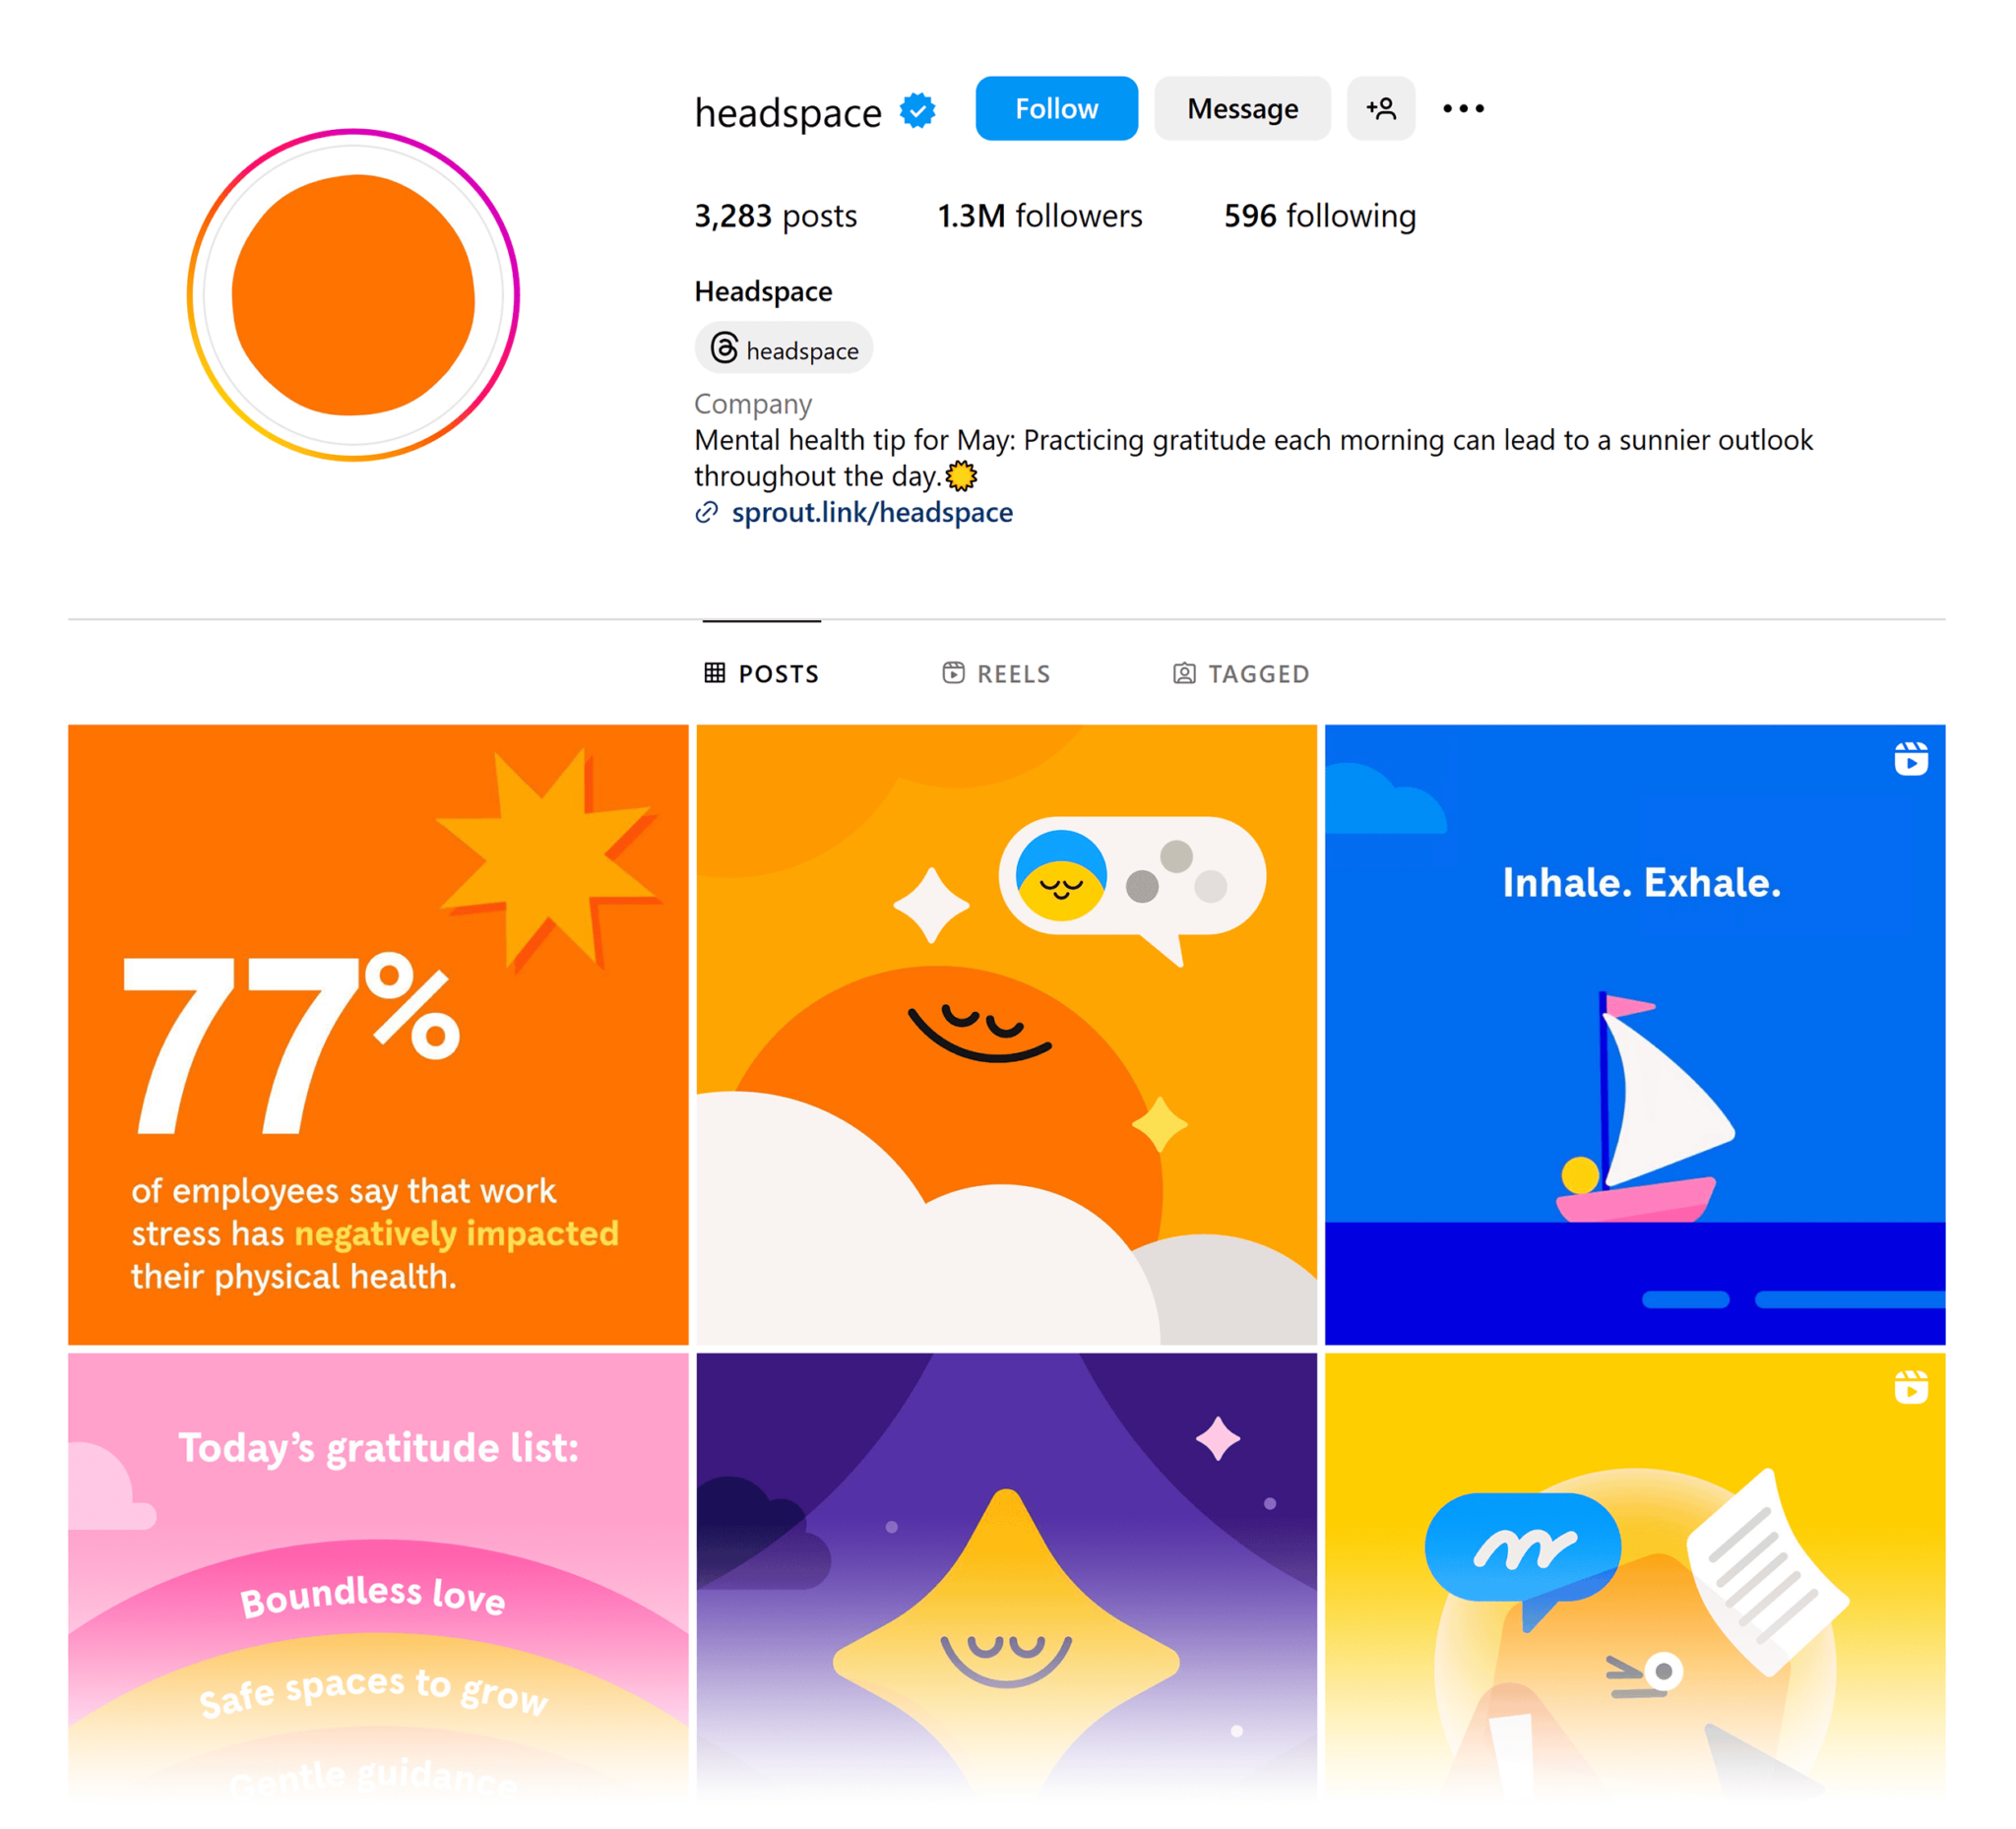 instagram-headspace 22 Content Marketing Examples to Inspire You